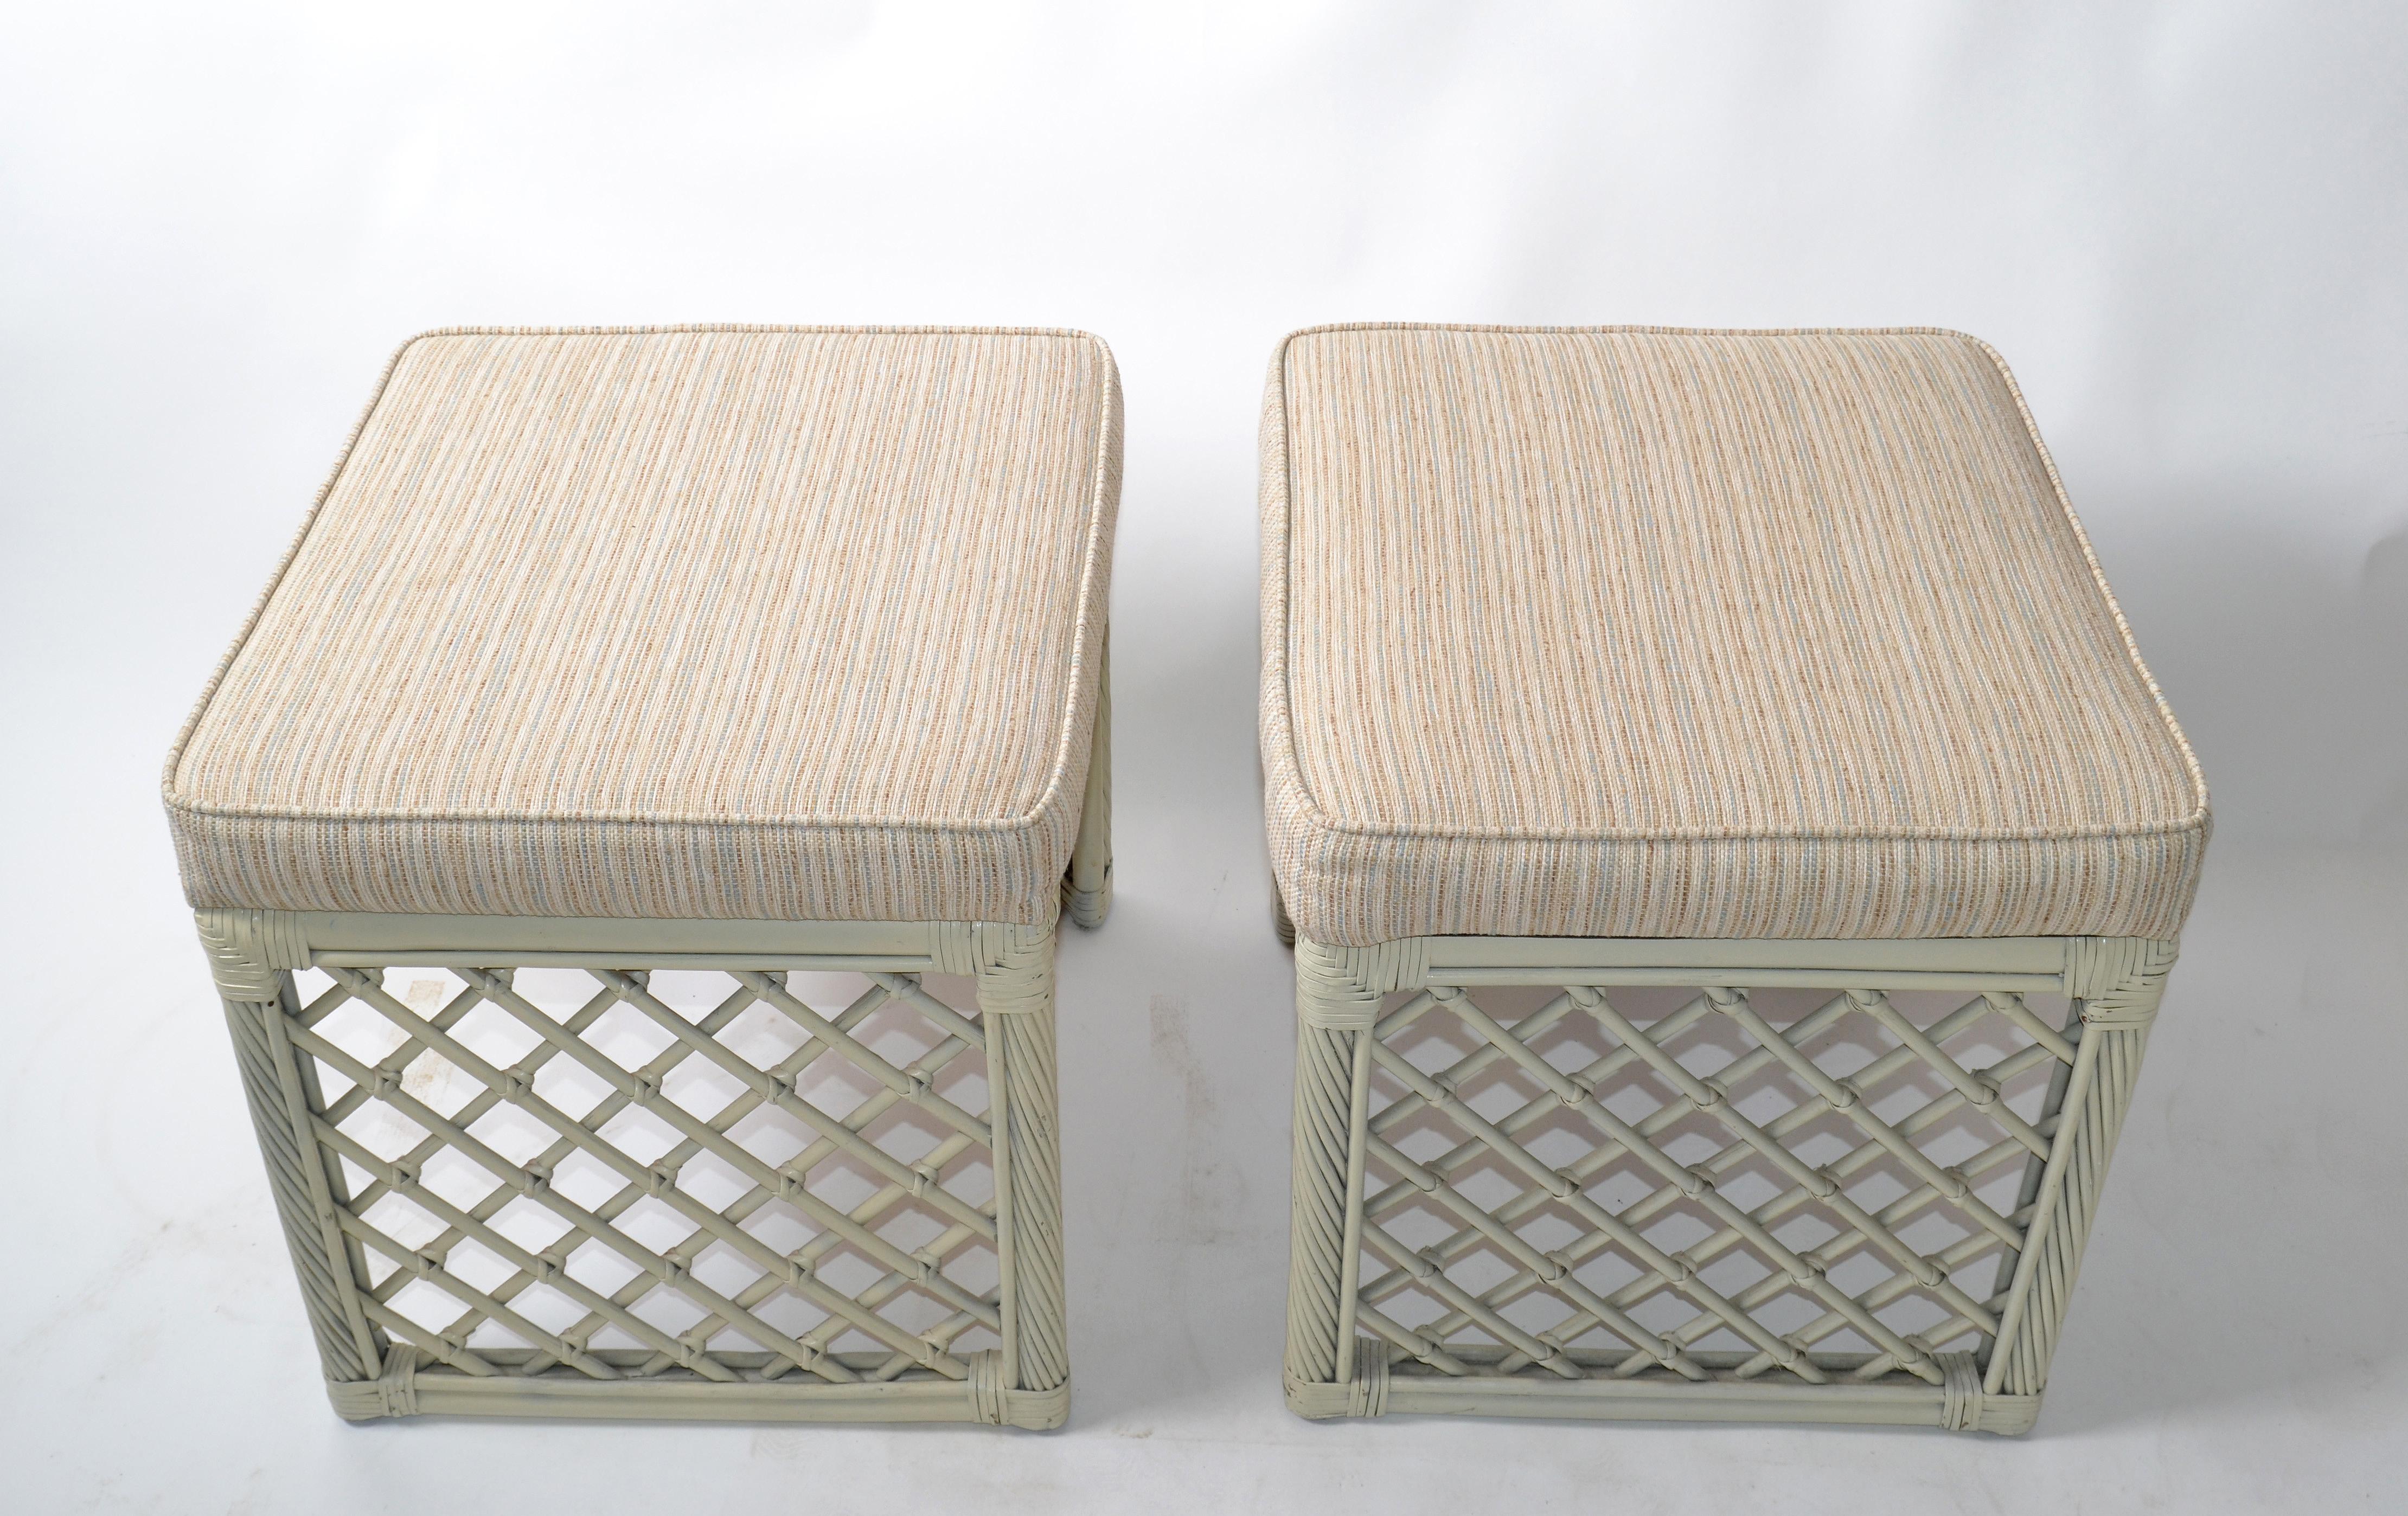 Pair of Vintage Vogue Rattan Olive Green Bamboo and Rattan Benches Stools 1970 For Sale 6